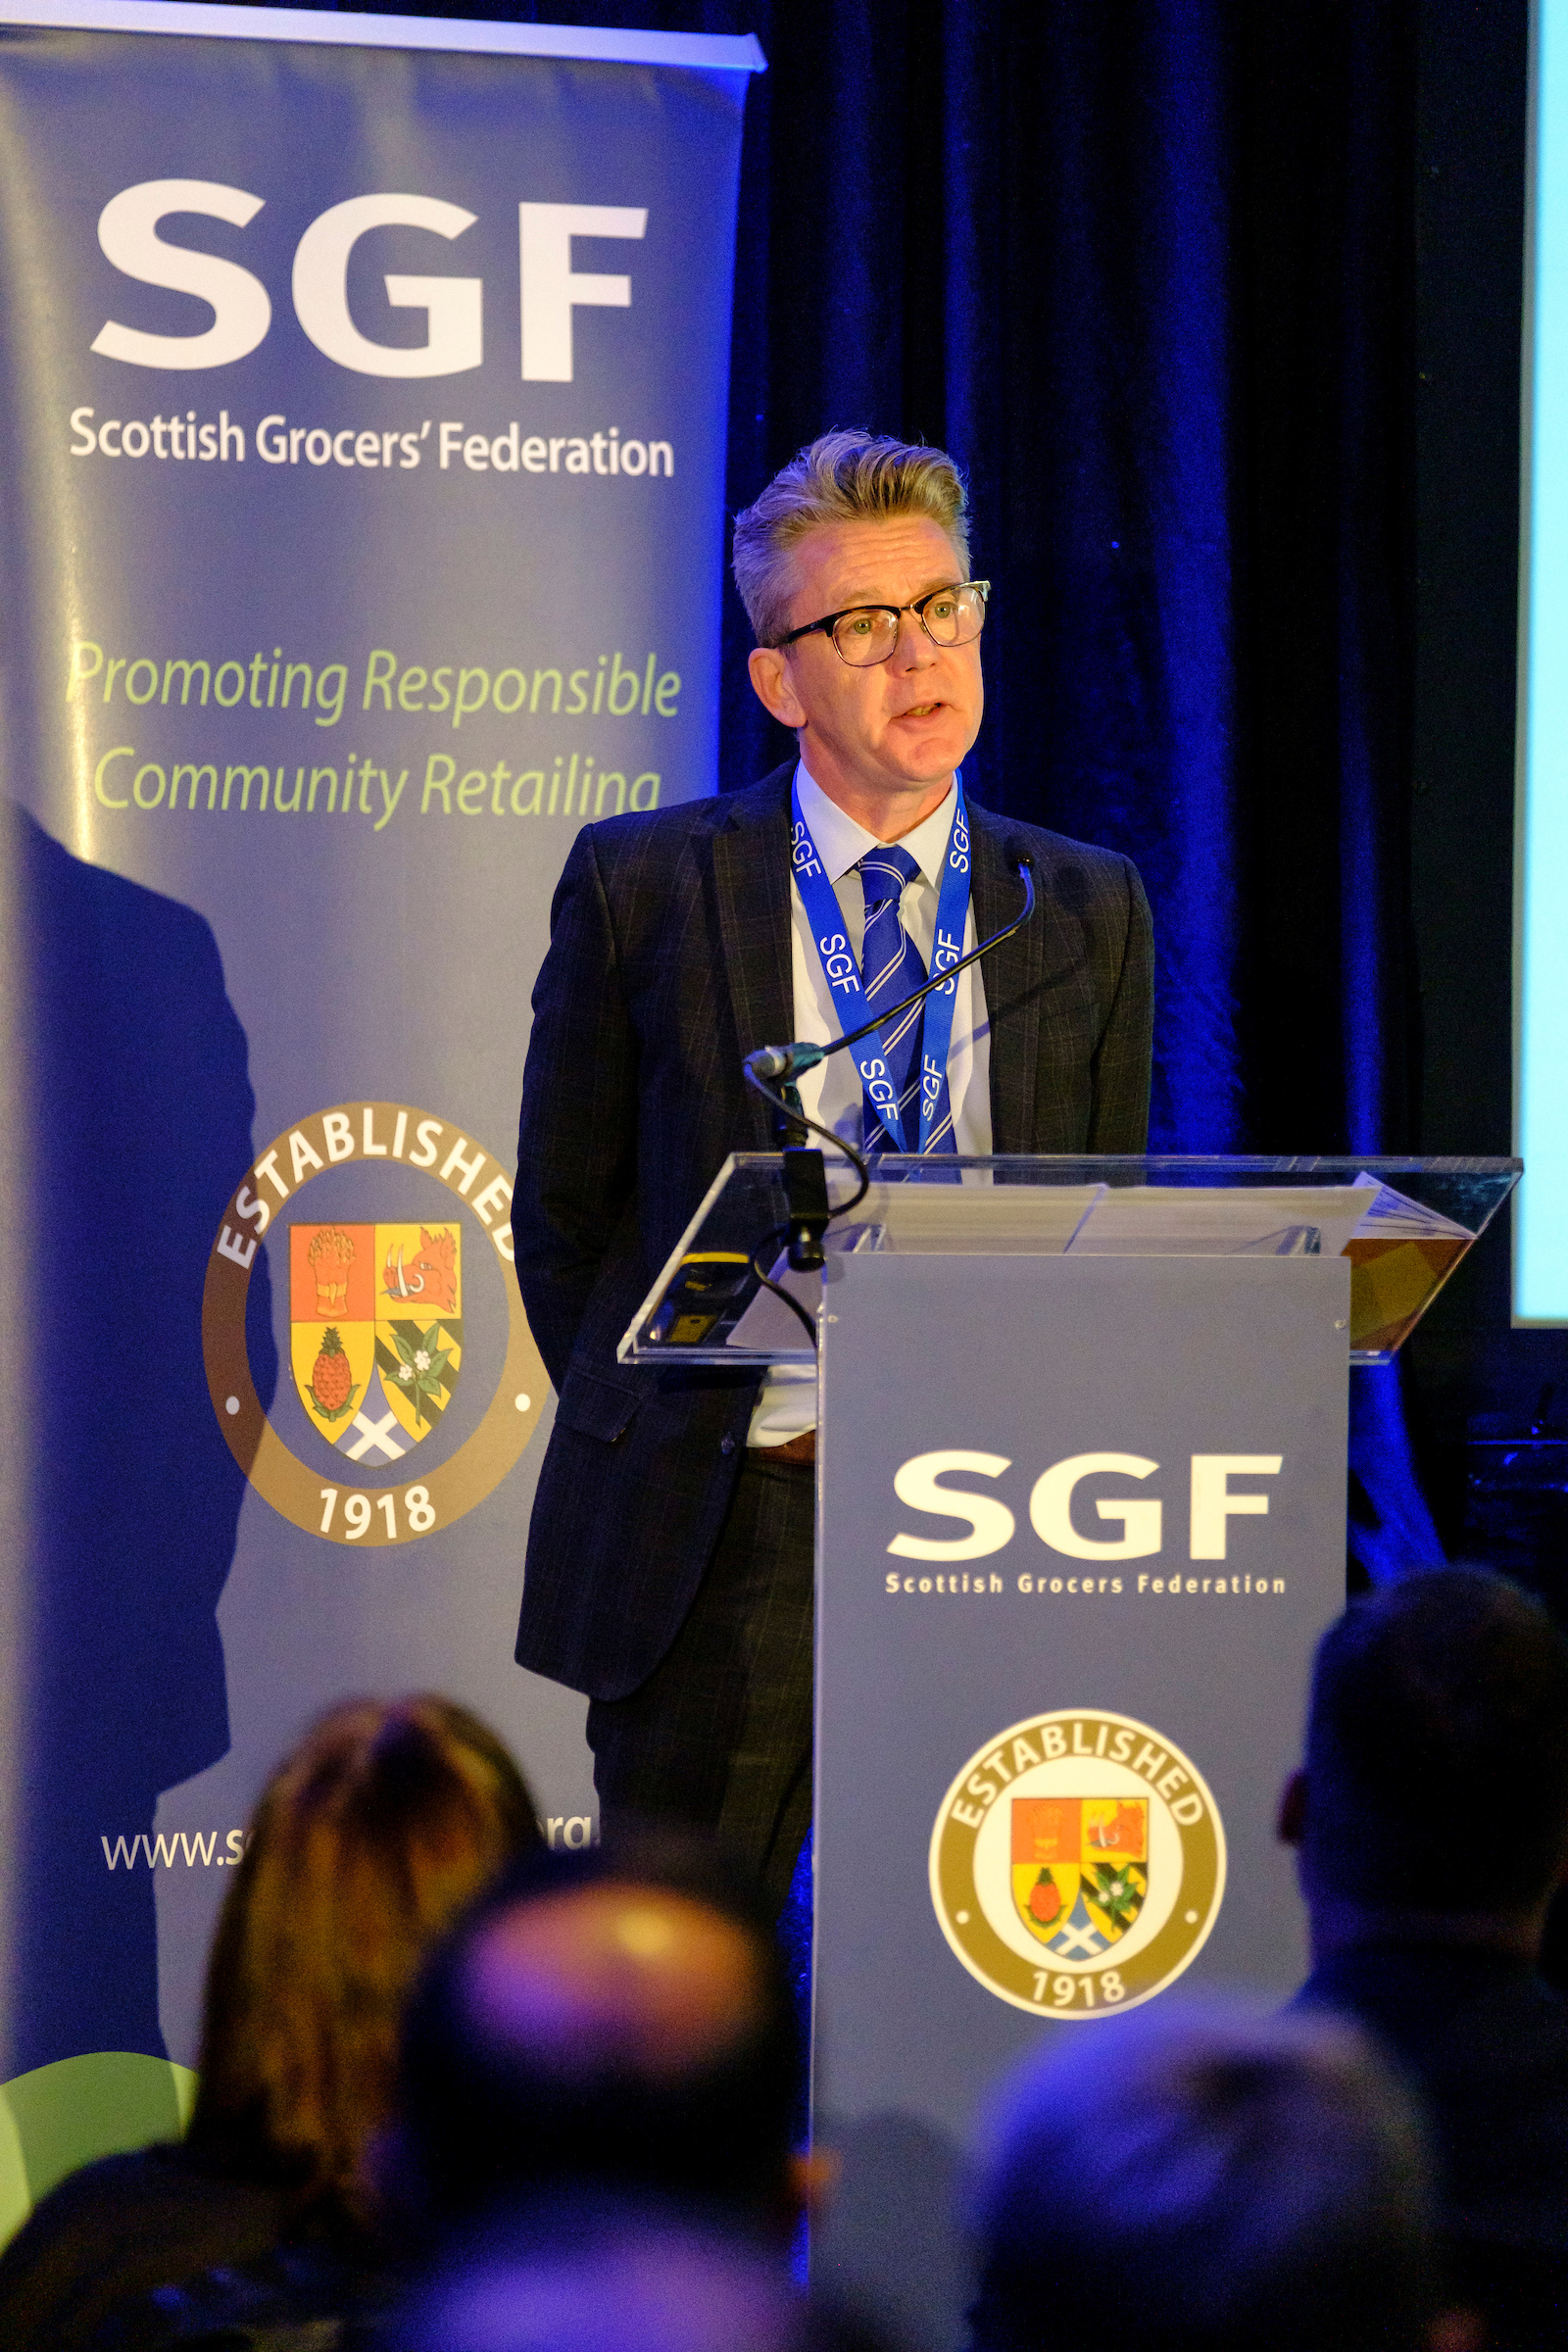 Scottish Grocers Federation strengthens its succession planning